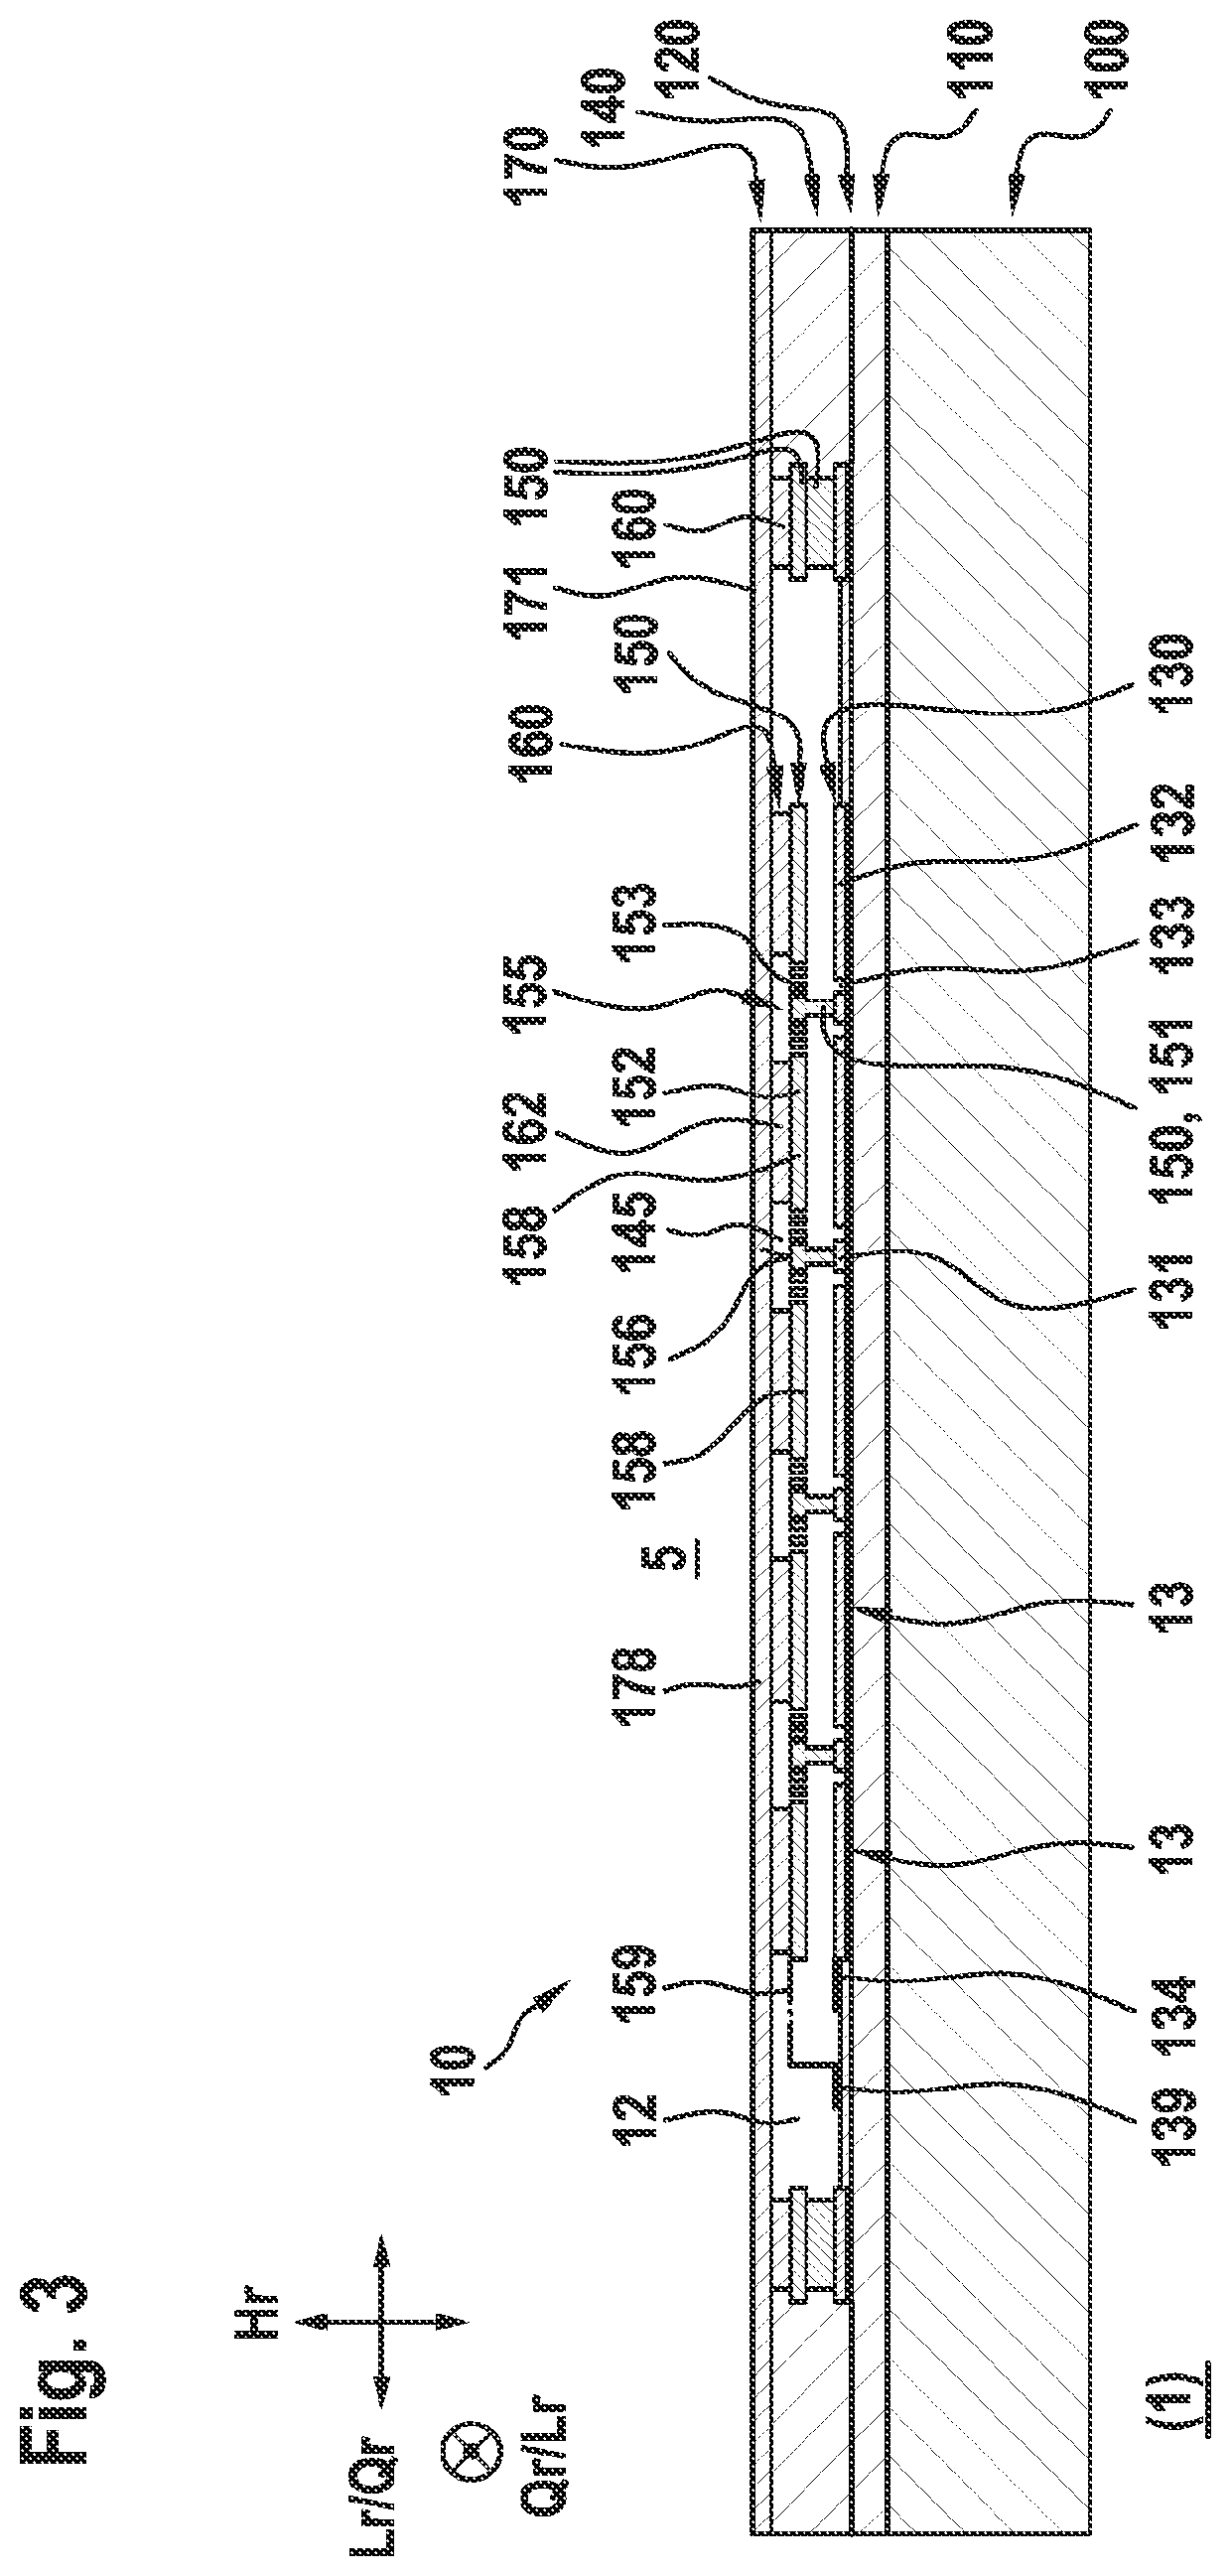 Pressure sensor device and method for producing a pressure sensor device